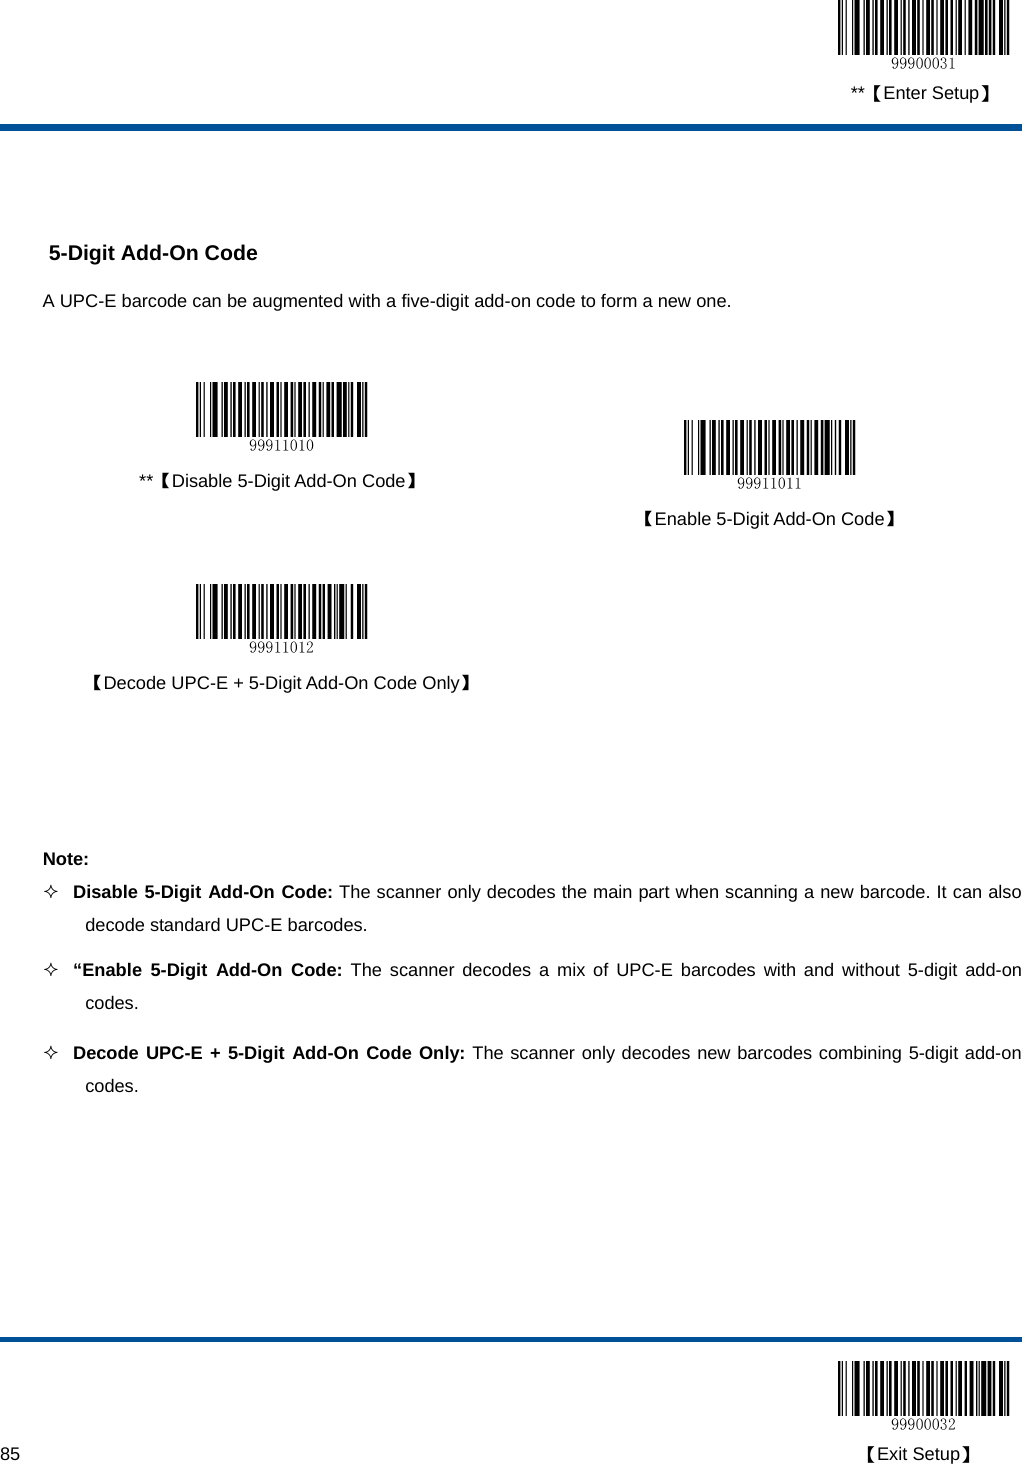  **【Enter Setup】  85                                                                                                                                                                                        【Exit Setup】   5-Digit Add-On Code A UPC-E barcode can be augmented with a five-digit add-on code to form a new one.    **【Disable 5-Digit Add-On Code】   【Enable 5-Digit Add-On Code】     【Decode UPC-E + 5-Digit Add-On Code Only】     Note:  Disable 5-Digit Add-On Code: The scanner only decodes the main part when scanning a new barcode. It can also decode standard UPC-E barcodes.  “Enable 5-Digit Add-On Code: The scanner decodes a mix of UPC-E barcodes with and without 5-digit add-on codes.  Decode UPC-E + 5-Digit Add-On Code Only: The scanner only decodes new barcodes combining 5-digit add-on codes. 